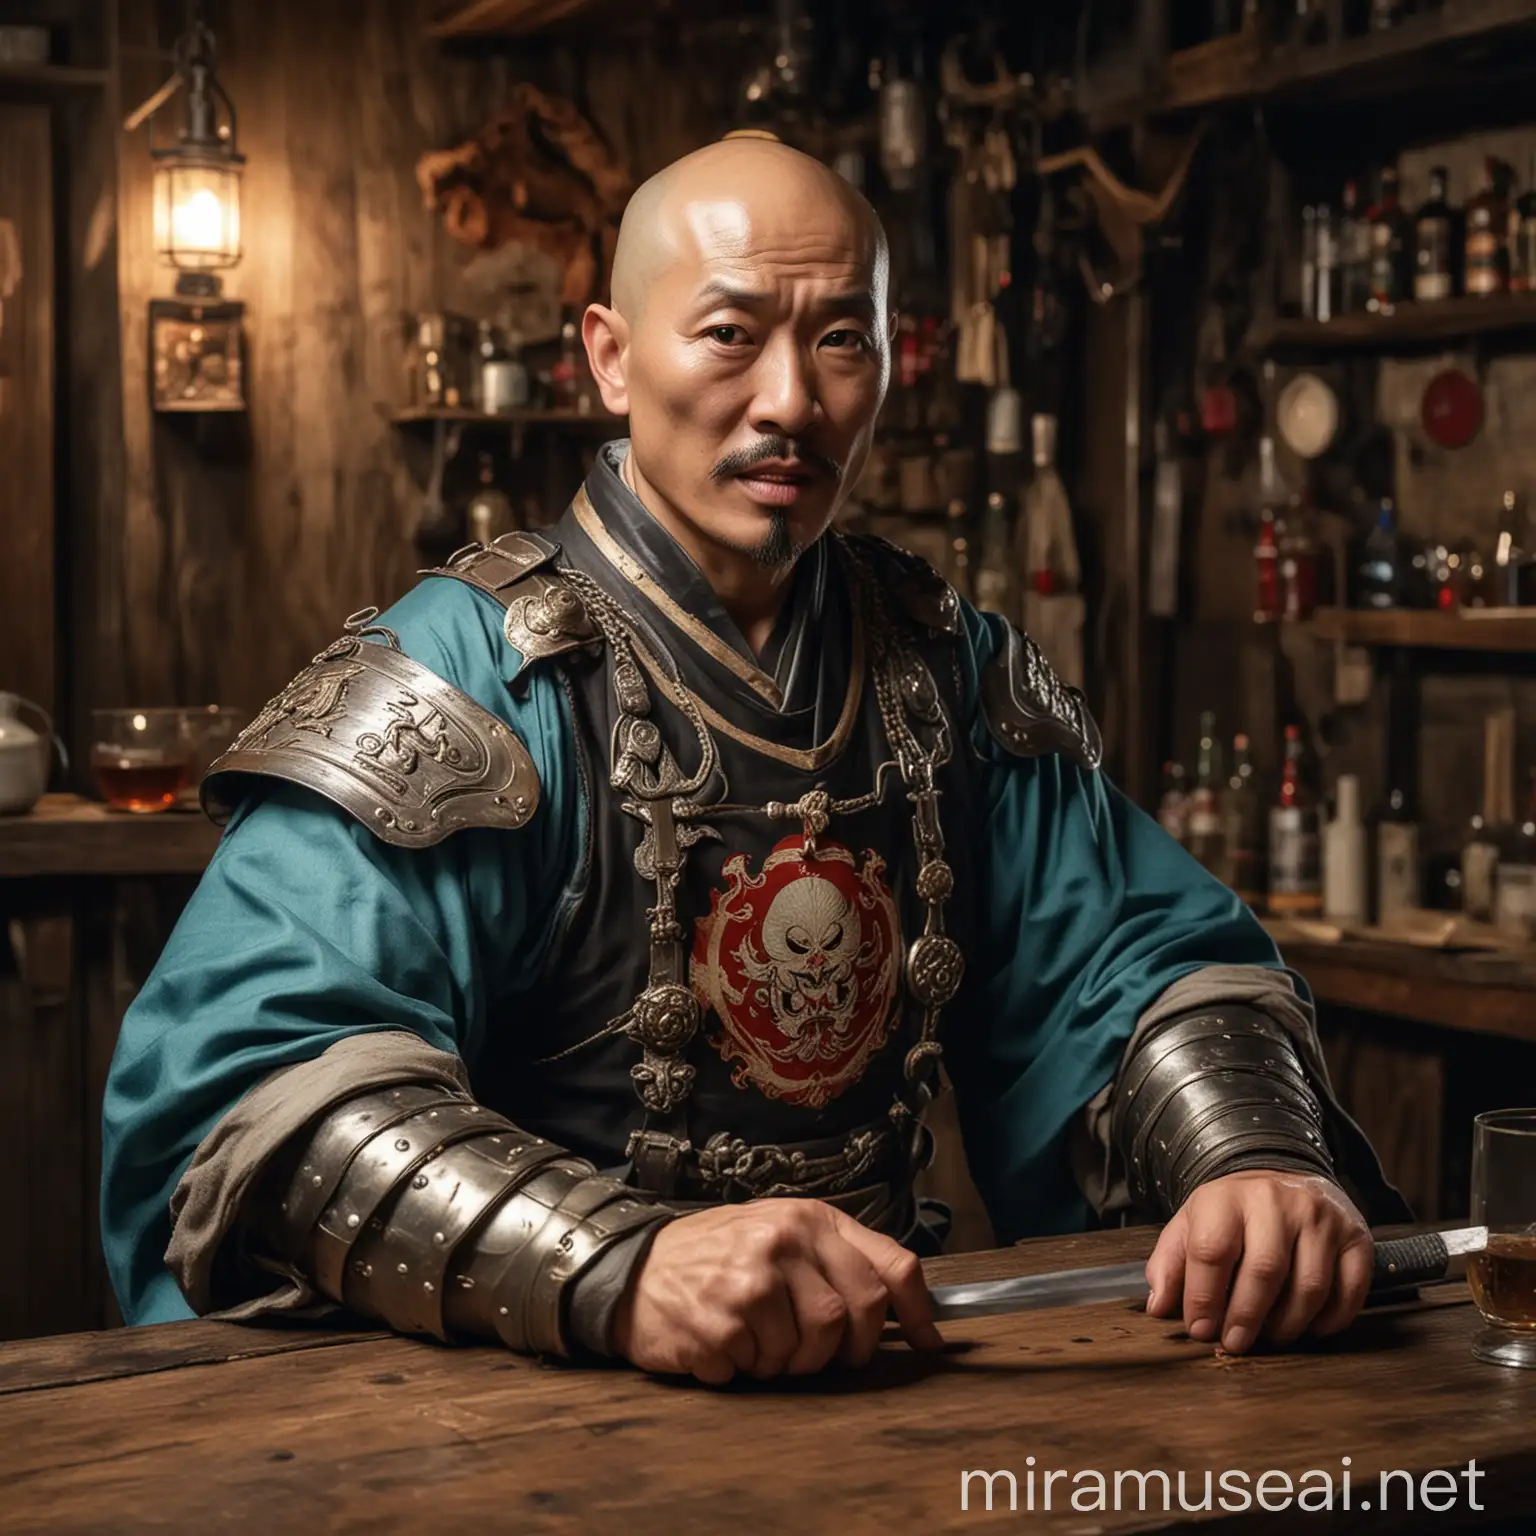 Chinese Paladin Drinking Moonshine in Tavern with Sword and Shield